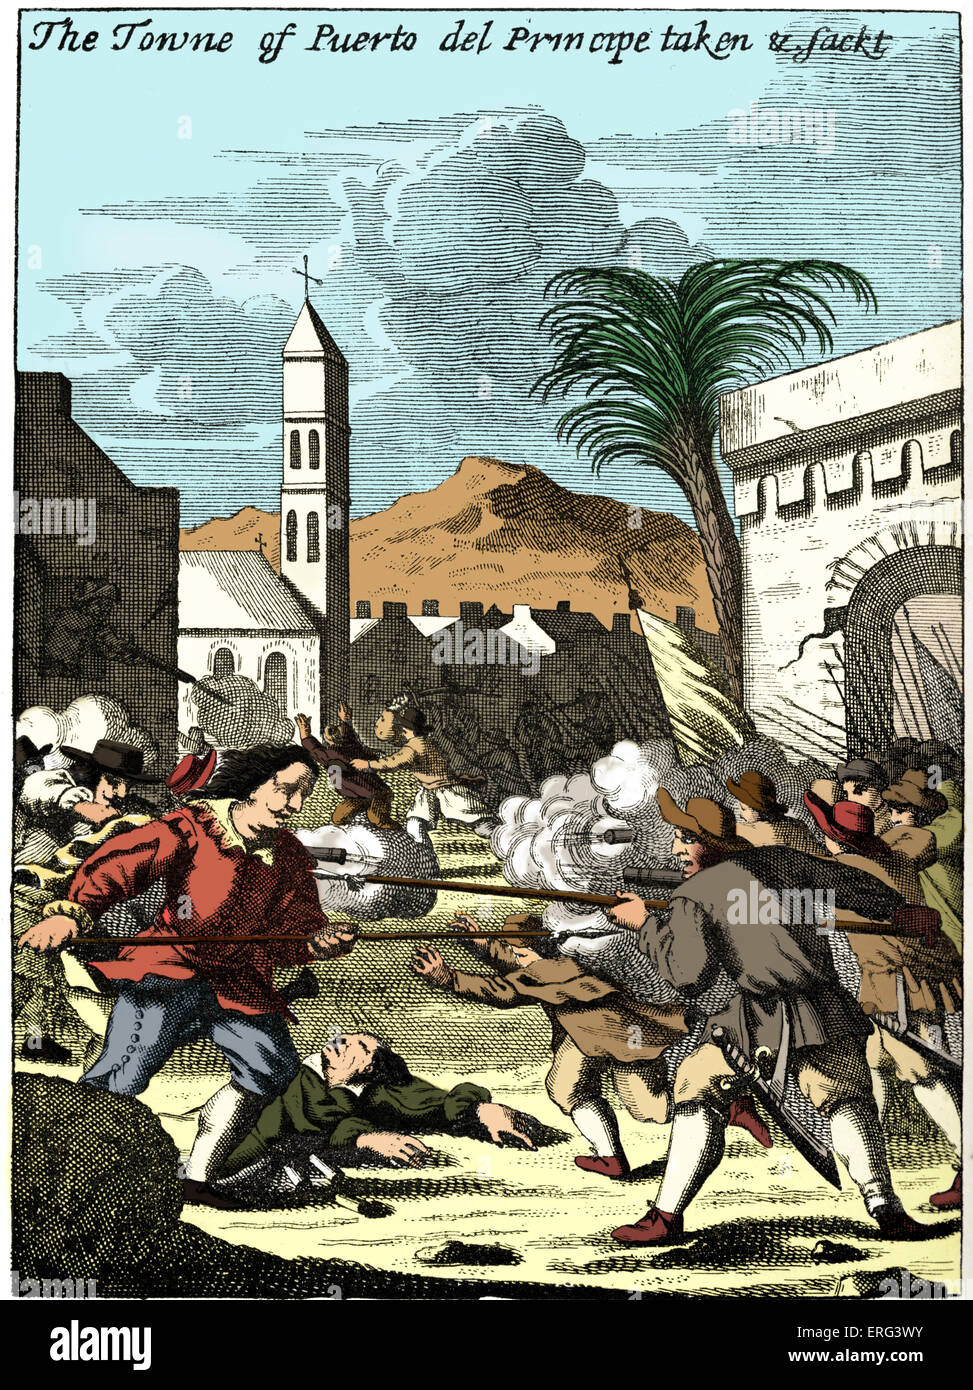 The Towne of Puerto del Principe taken & sackt', engraving. The Welsh privateer, Sir Henry Morgan, capturing and sacking Puerto del Principe, (present-day Camagüey, Cuba). HM: famous privateers in the Caribbean in the 1660s and 1670s, born c. 1635 – 1688/ 9 (?) colourized Stock Photo